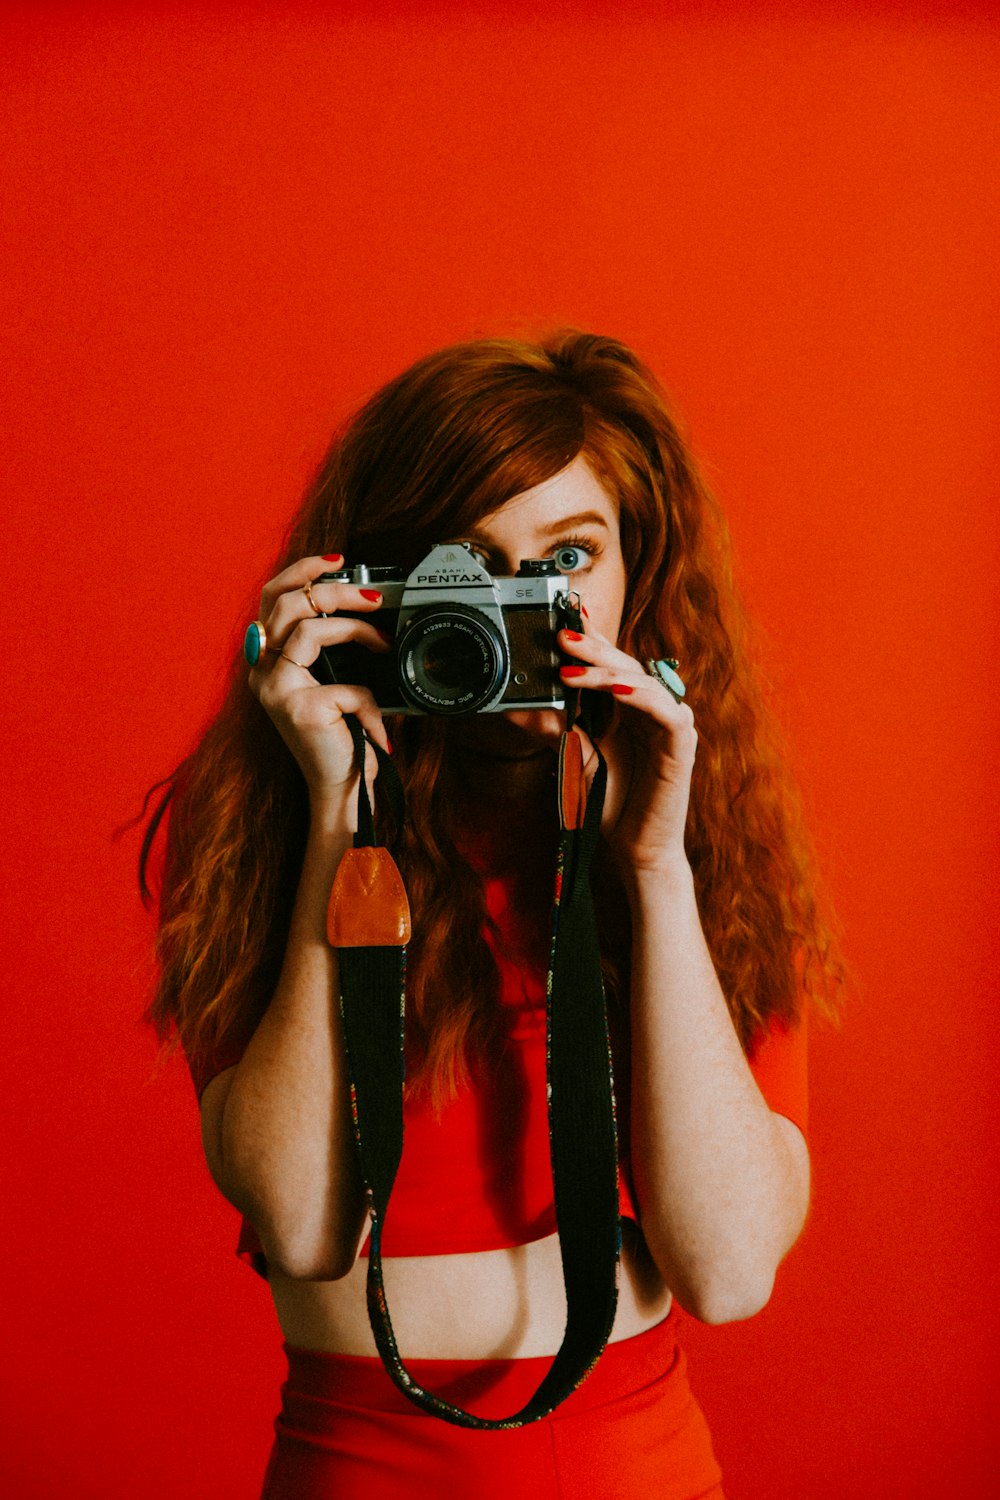 woman in red top and bottoms holding Pentax camera